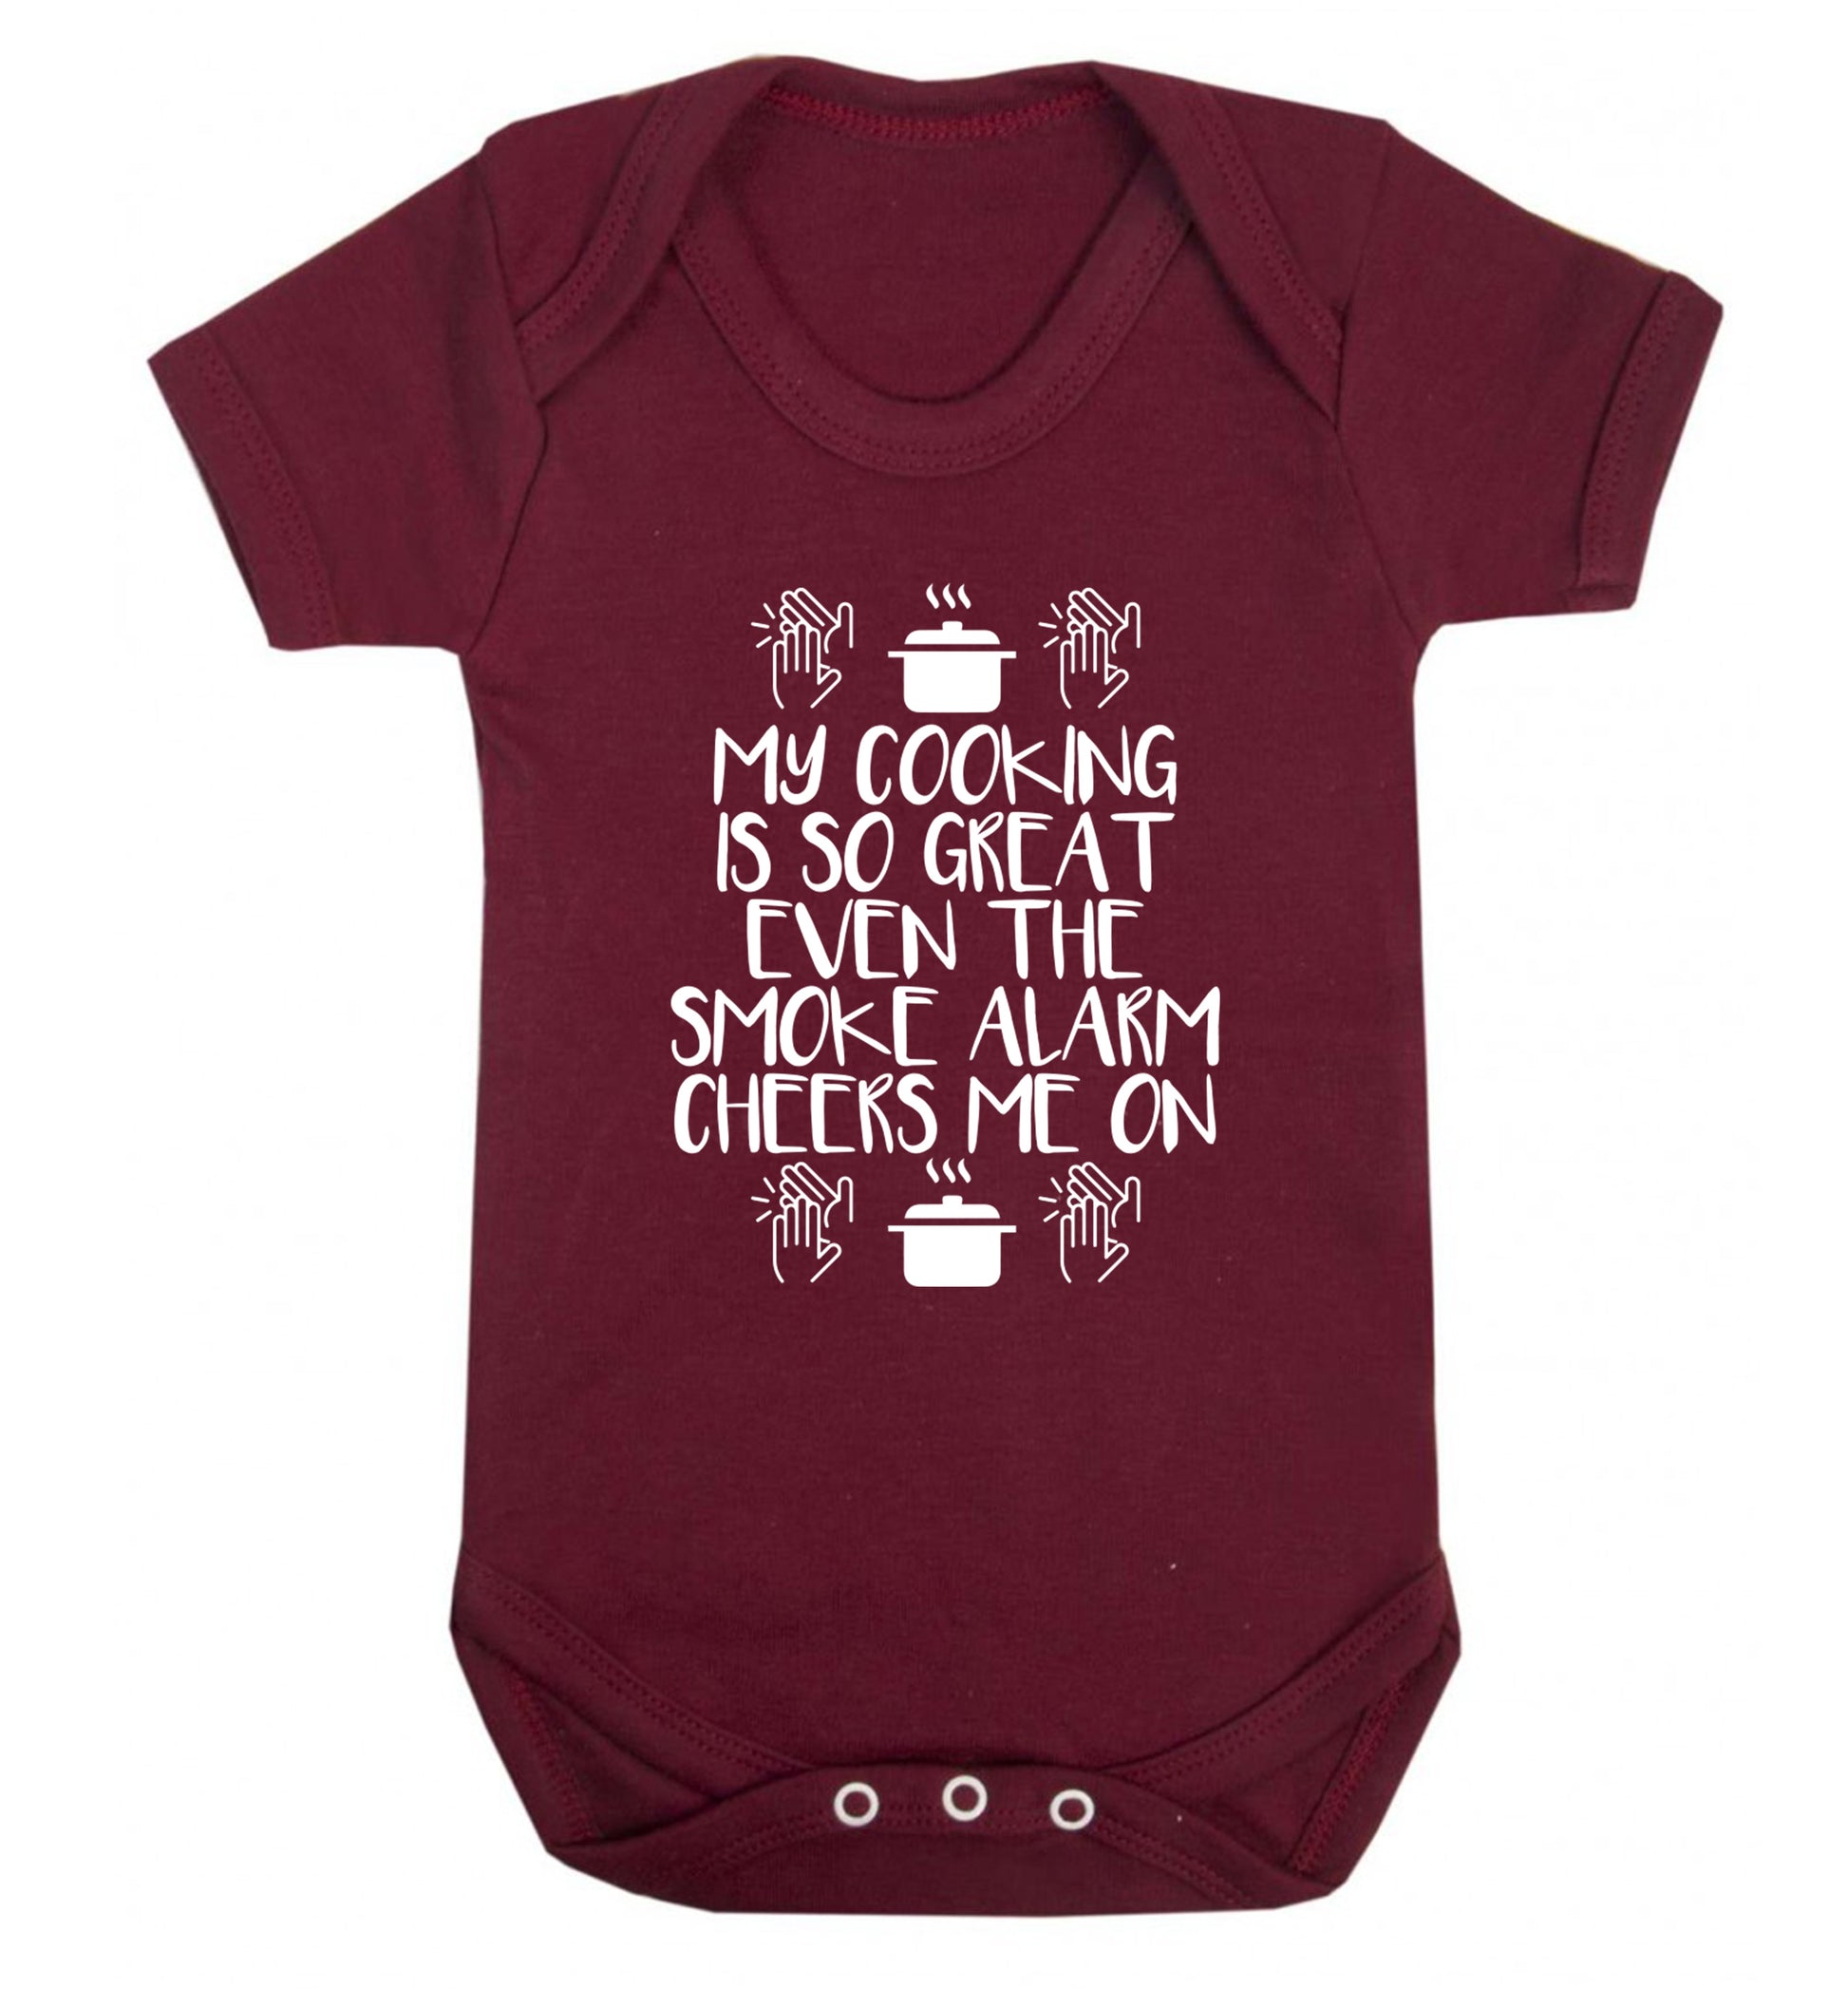 My cooking is so great even the smoke alarm cheers me on! Baby Vest maroon 18-24 months